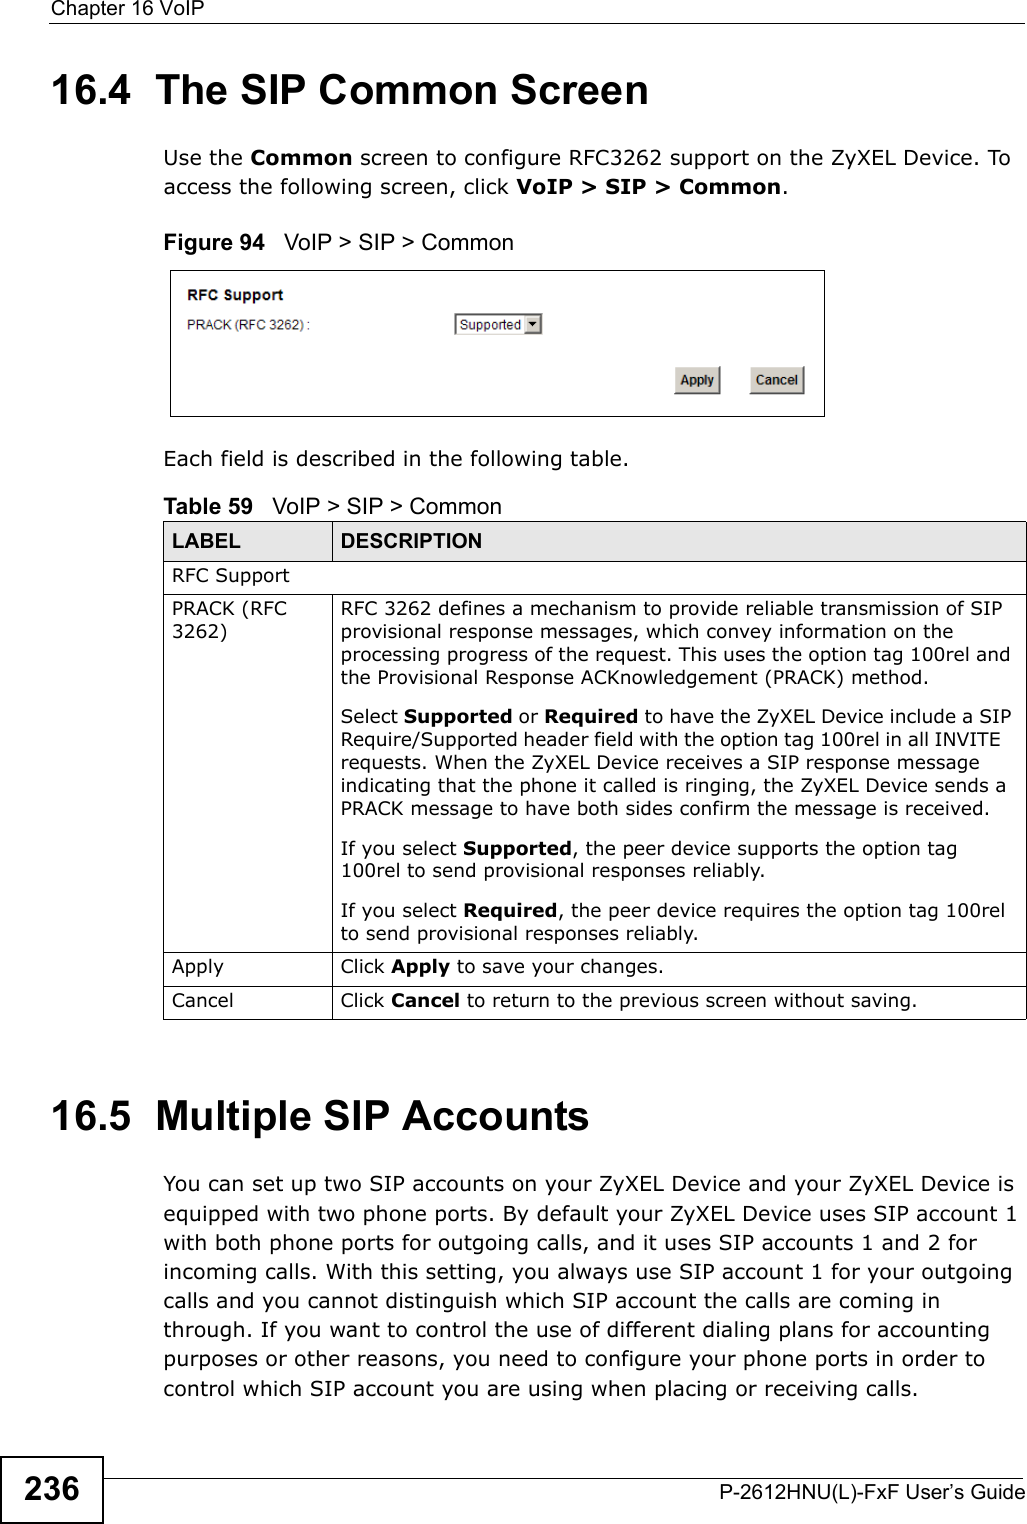 Chapter 16 VoIPP-2612HNU(L)-FxF User’s Guide23616.4  The SIP Common ScreenUse the Common screen to configure RFC3262 support on the ZyXEL Device. Toaccess the following screen, click VoIP &gt; SIP &gt; Common.Figure 94   VoIP &gt; SIP &gt; CommonEach field is described in the following table.16.5  Multiple SIP AccountsYou can set up two SIP accounts on your ZyXEL Device and your ZyXEL Device isequipped with two phone ports. By default your ZyXEL Device uses SIP account 1 with both phone ports for outgoing calls, and it uses SIP accounts 1 and 2 for incoming calls. With this setting, you always use SIP account 1 for your outgoingcalls and you cannot distinguish which SIP account the calls are coming in through. If you want to control the use of different dialing plans for accounting purposes or other reasons, you need to configure your phone ports in order tocontrol which SIP account you are using when placing or receiving calls.Table 59   VoIP &gt; SIP &gt; CommonLABEL DESCRIPTIONRFC SupportPRACK (RFC 3262)RFC 3262 defines a mechanism to provide reliable transmission of SIP provisional response messages, which convey information on the processing progress of the request. This uses the option tag 100rel and the Provisional Response ACKnowledgement (PRACK) method.Select Supported or Required to have the ZyXEL Device include a SIP Require/Supported header field with the option tag 100rel in all INVITE   requests. When the ZyXEL Device receives a SIP response message indicating that the phone it called is ringing, the ZyXEL Device sends a PRACK message to have both sides confirm the message is received. If you select Supported, the peer device supports the option tag 100rel to send provisional responses reliably.If you select Required, the peer device requires the option tag 100rel to send provisional responses reliably.Apply Click Apply to save your changes.Cancel Click Cancel to return to the previous screen without saving.